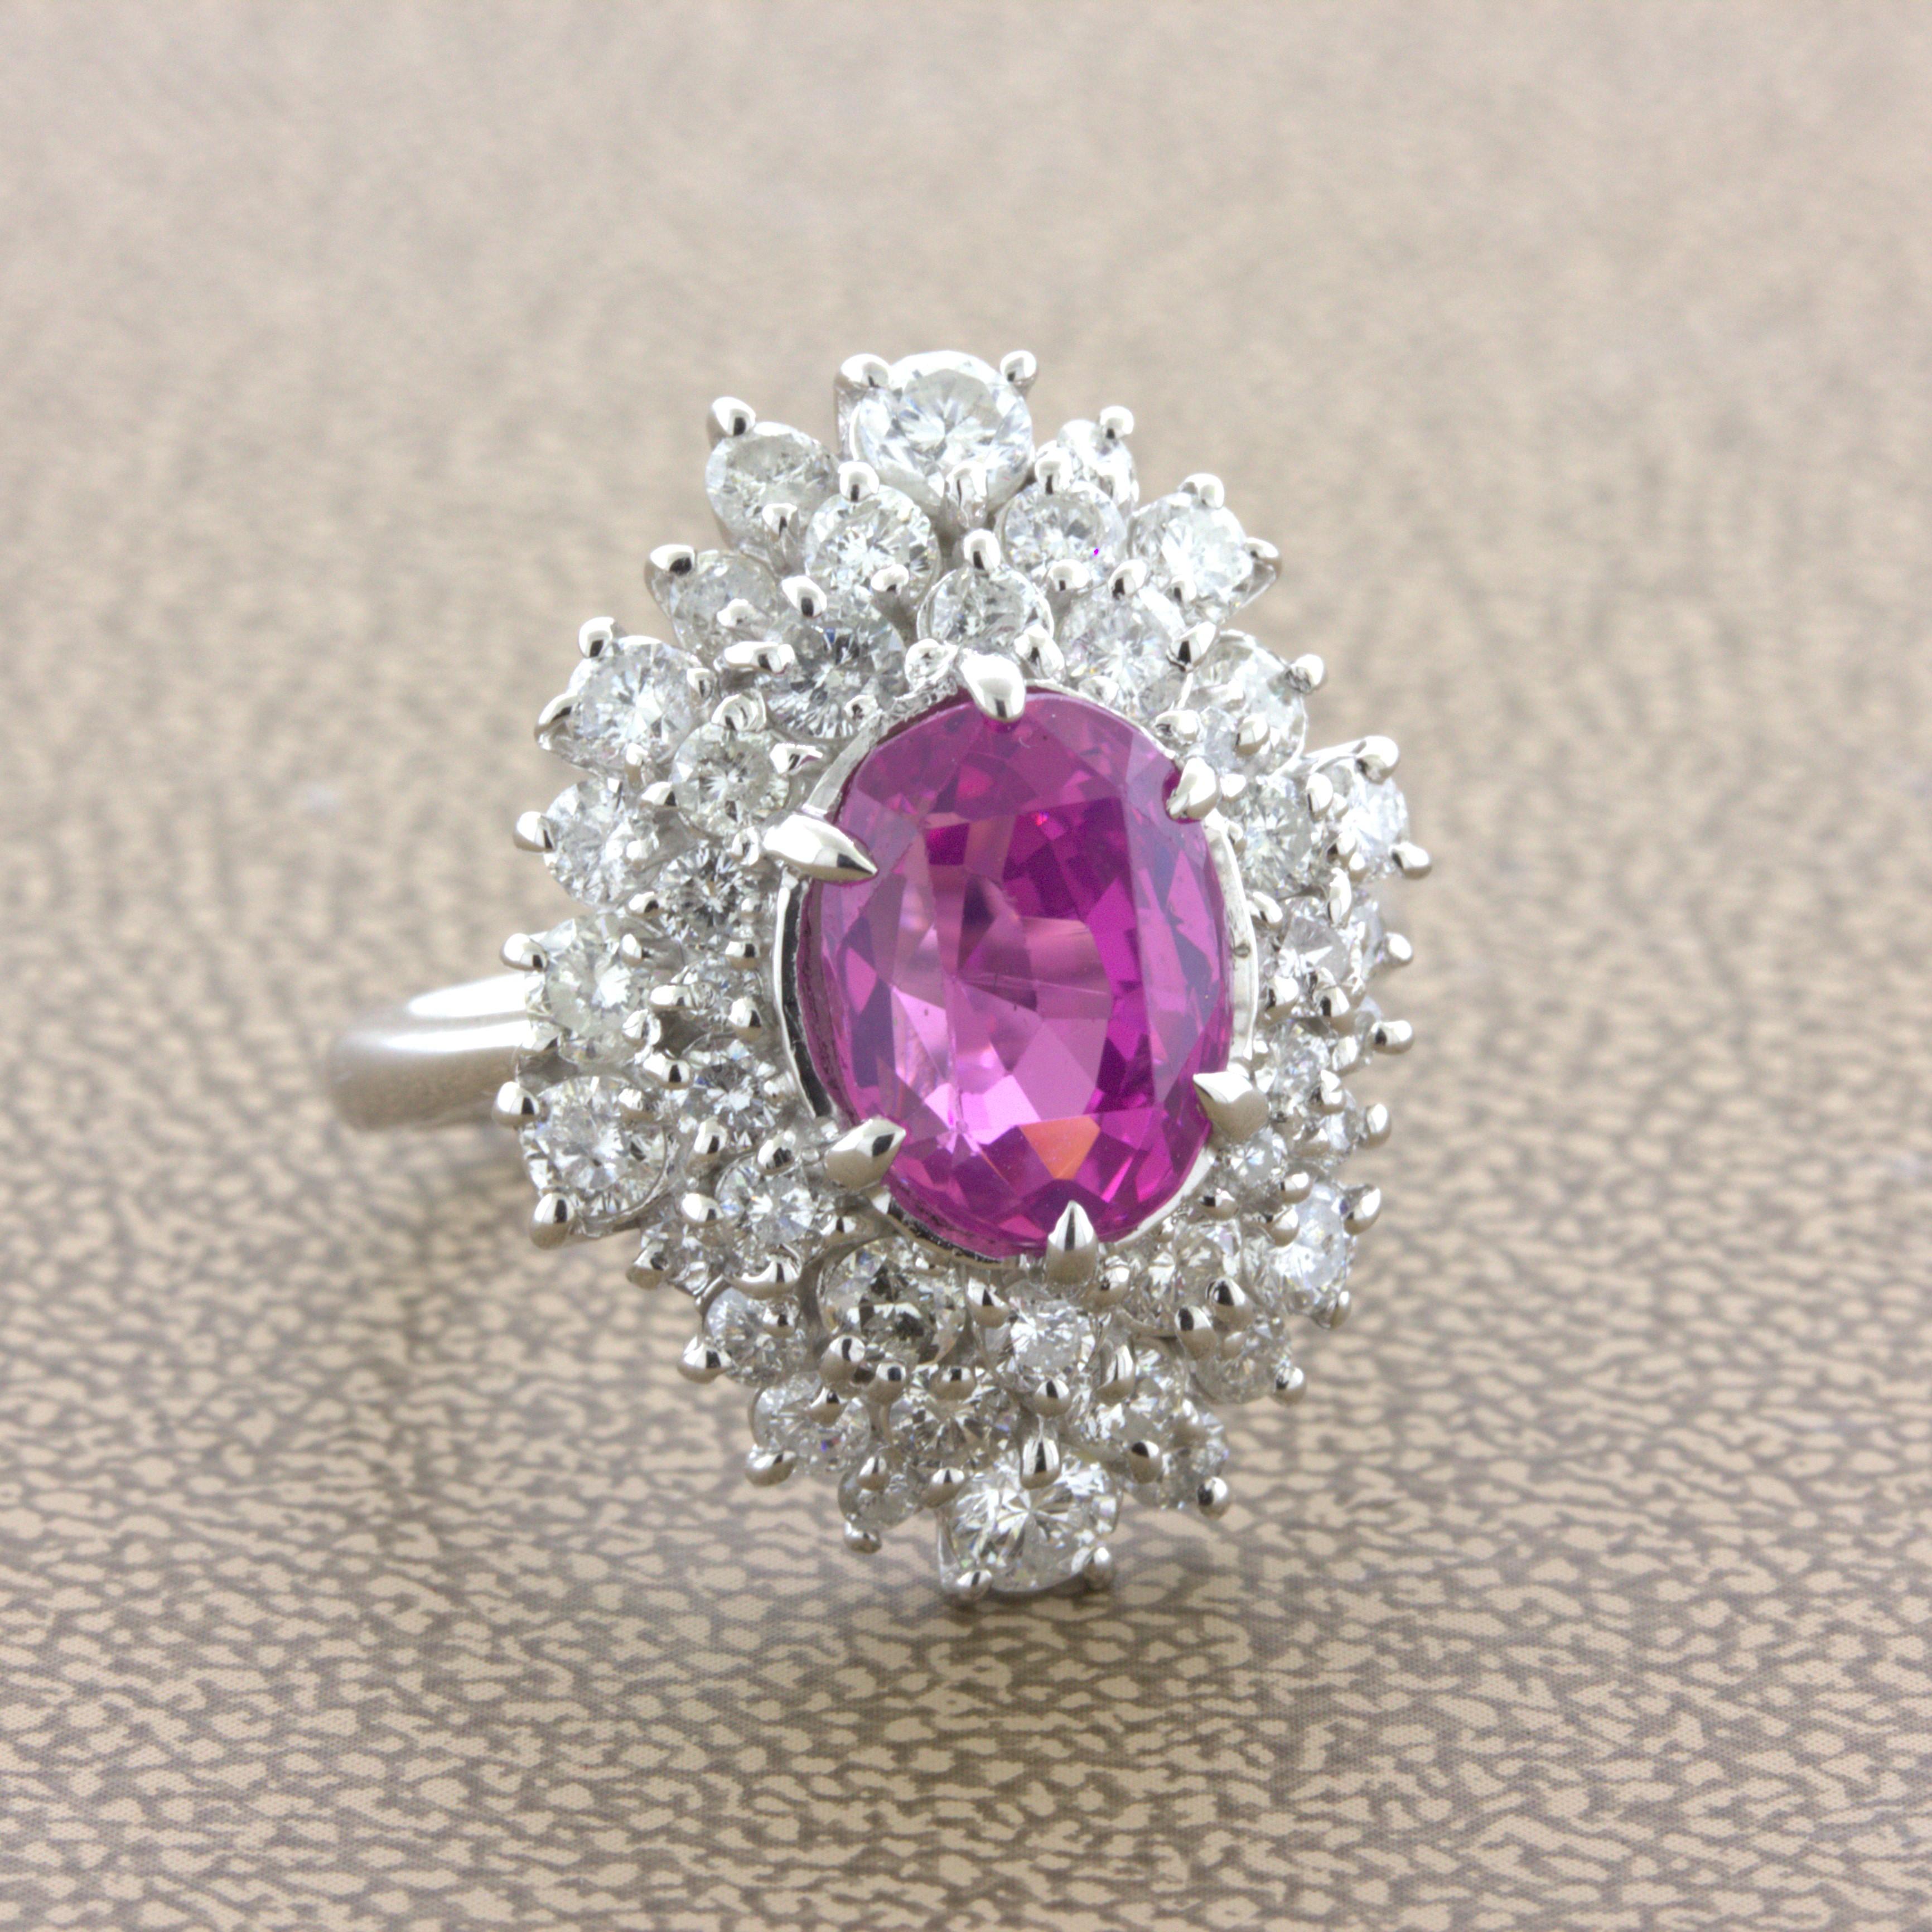 4.25 Carat “Barbie Pink” Sapphire Diamond Platinum Ring, GIA Certified In New Condition For Sale In Beverly Hills, CA